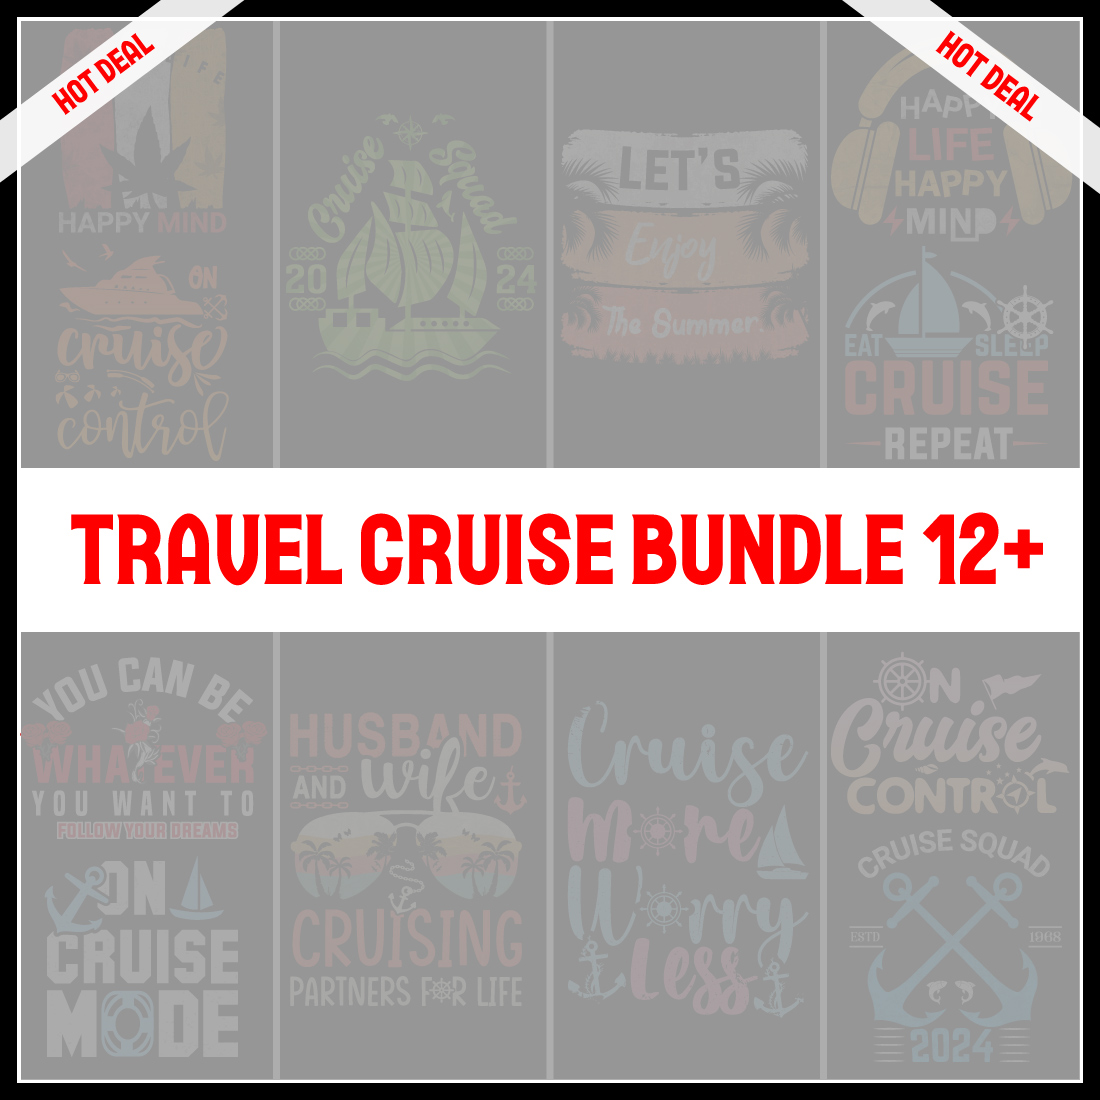 Cruise T-Shirt Design 12+Bundle- Cruise T-shirt Design- Travel cruise vector, illustration, silhouette, or graphics cover image.